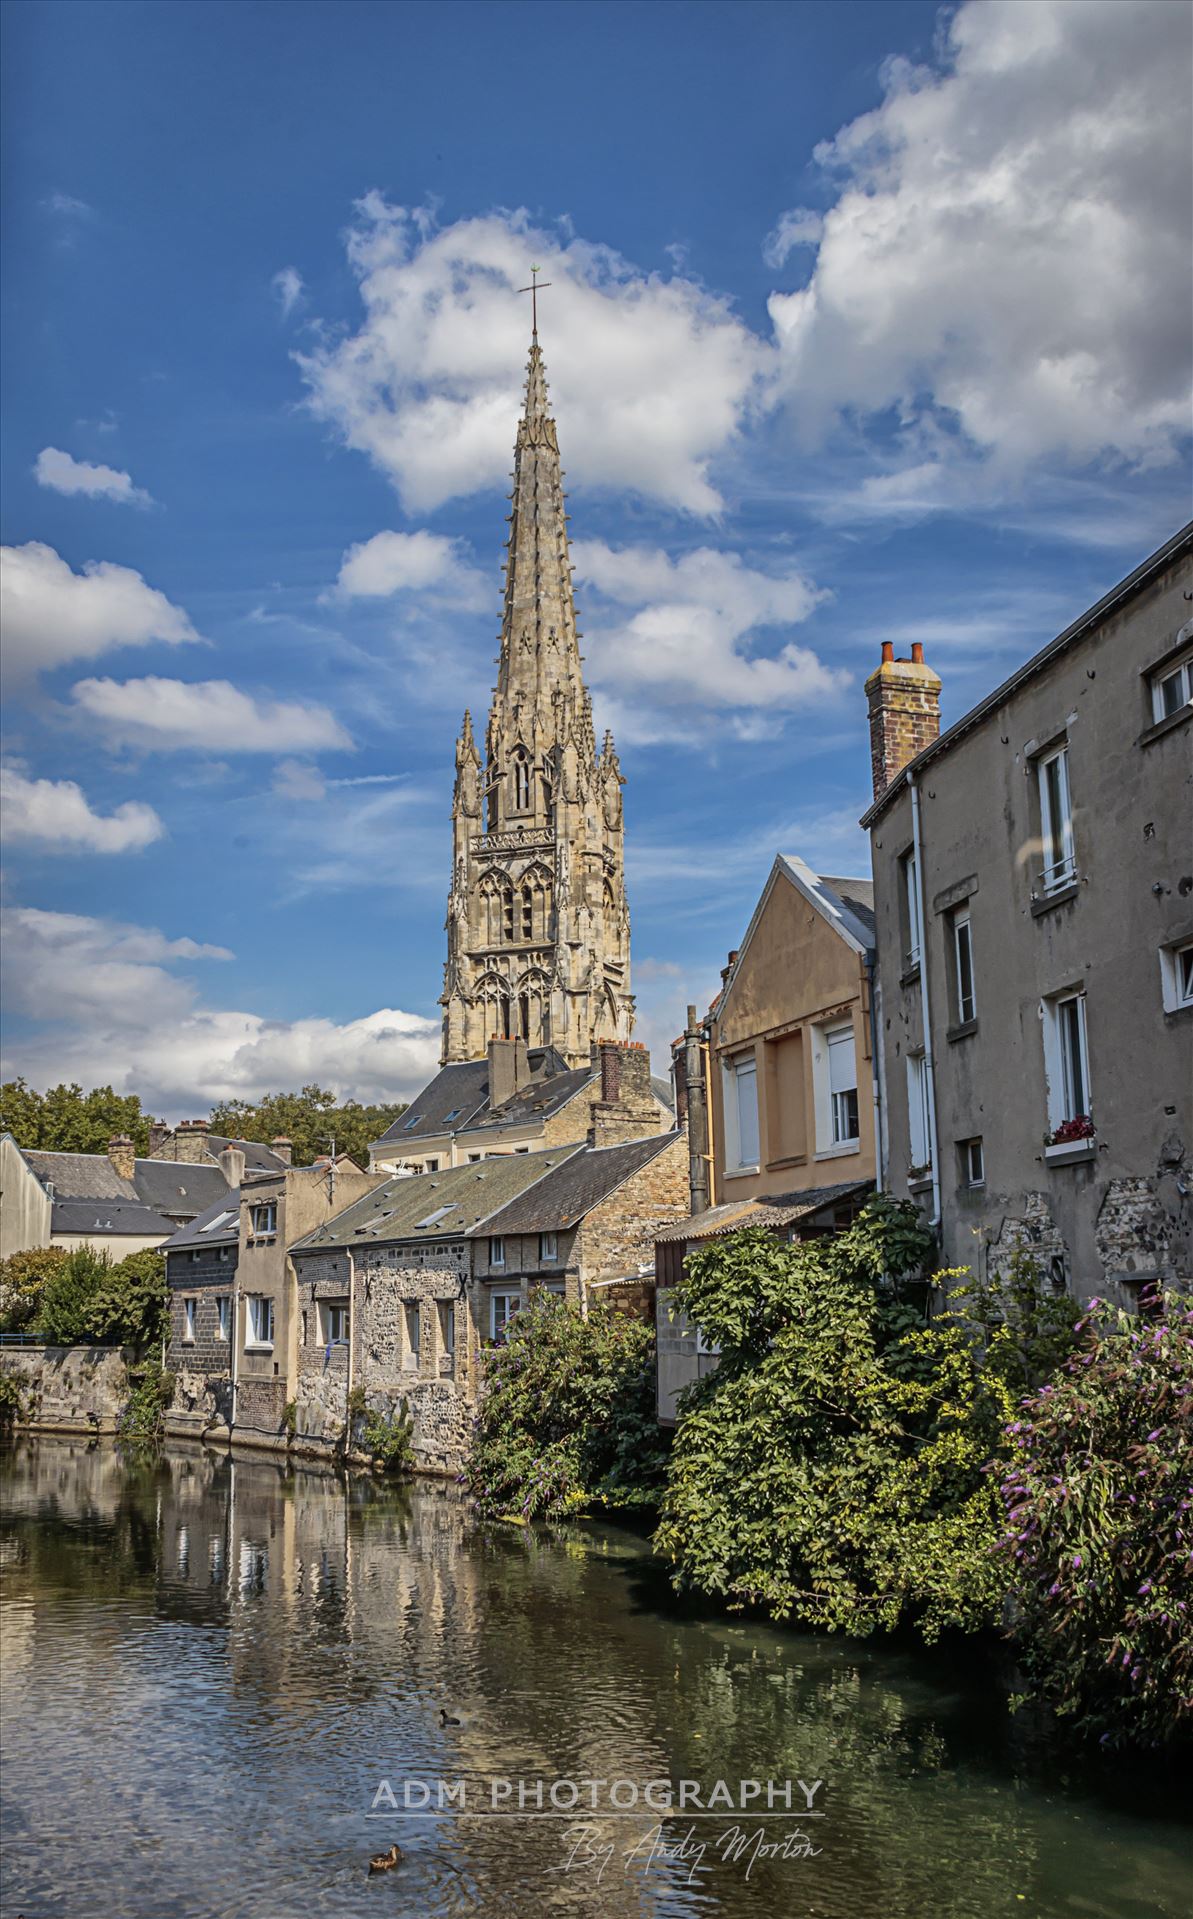 The Church In The Old Town Of Harfleur, France The Church In The Old Town Of Harfleur, France by Andy Morton Photography